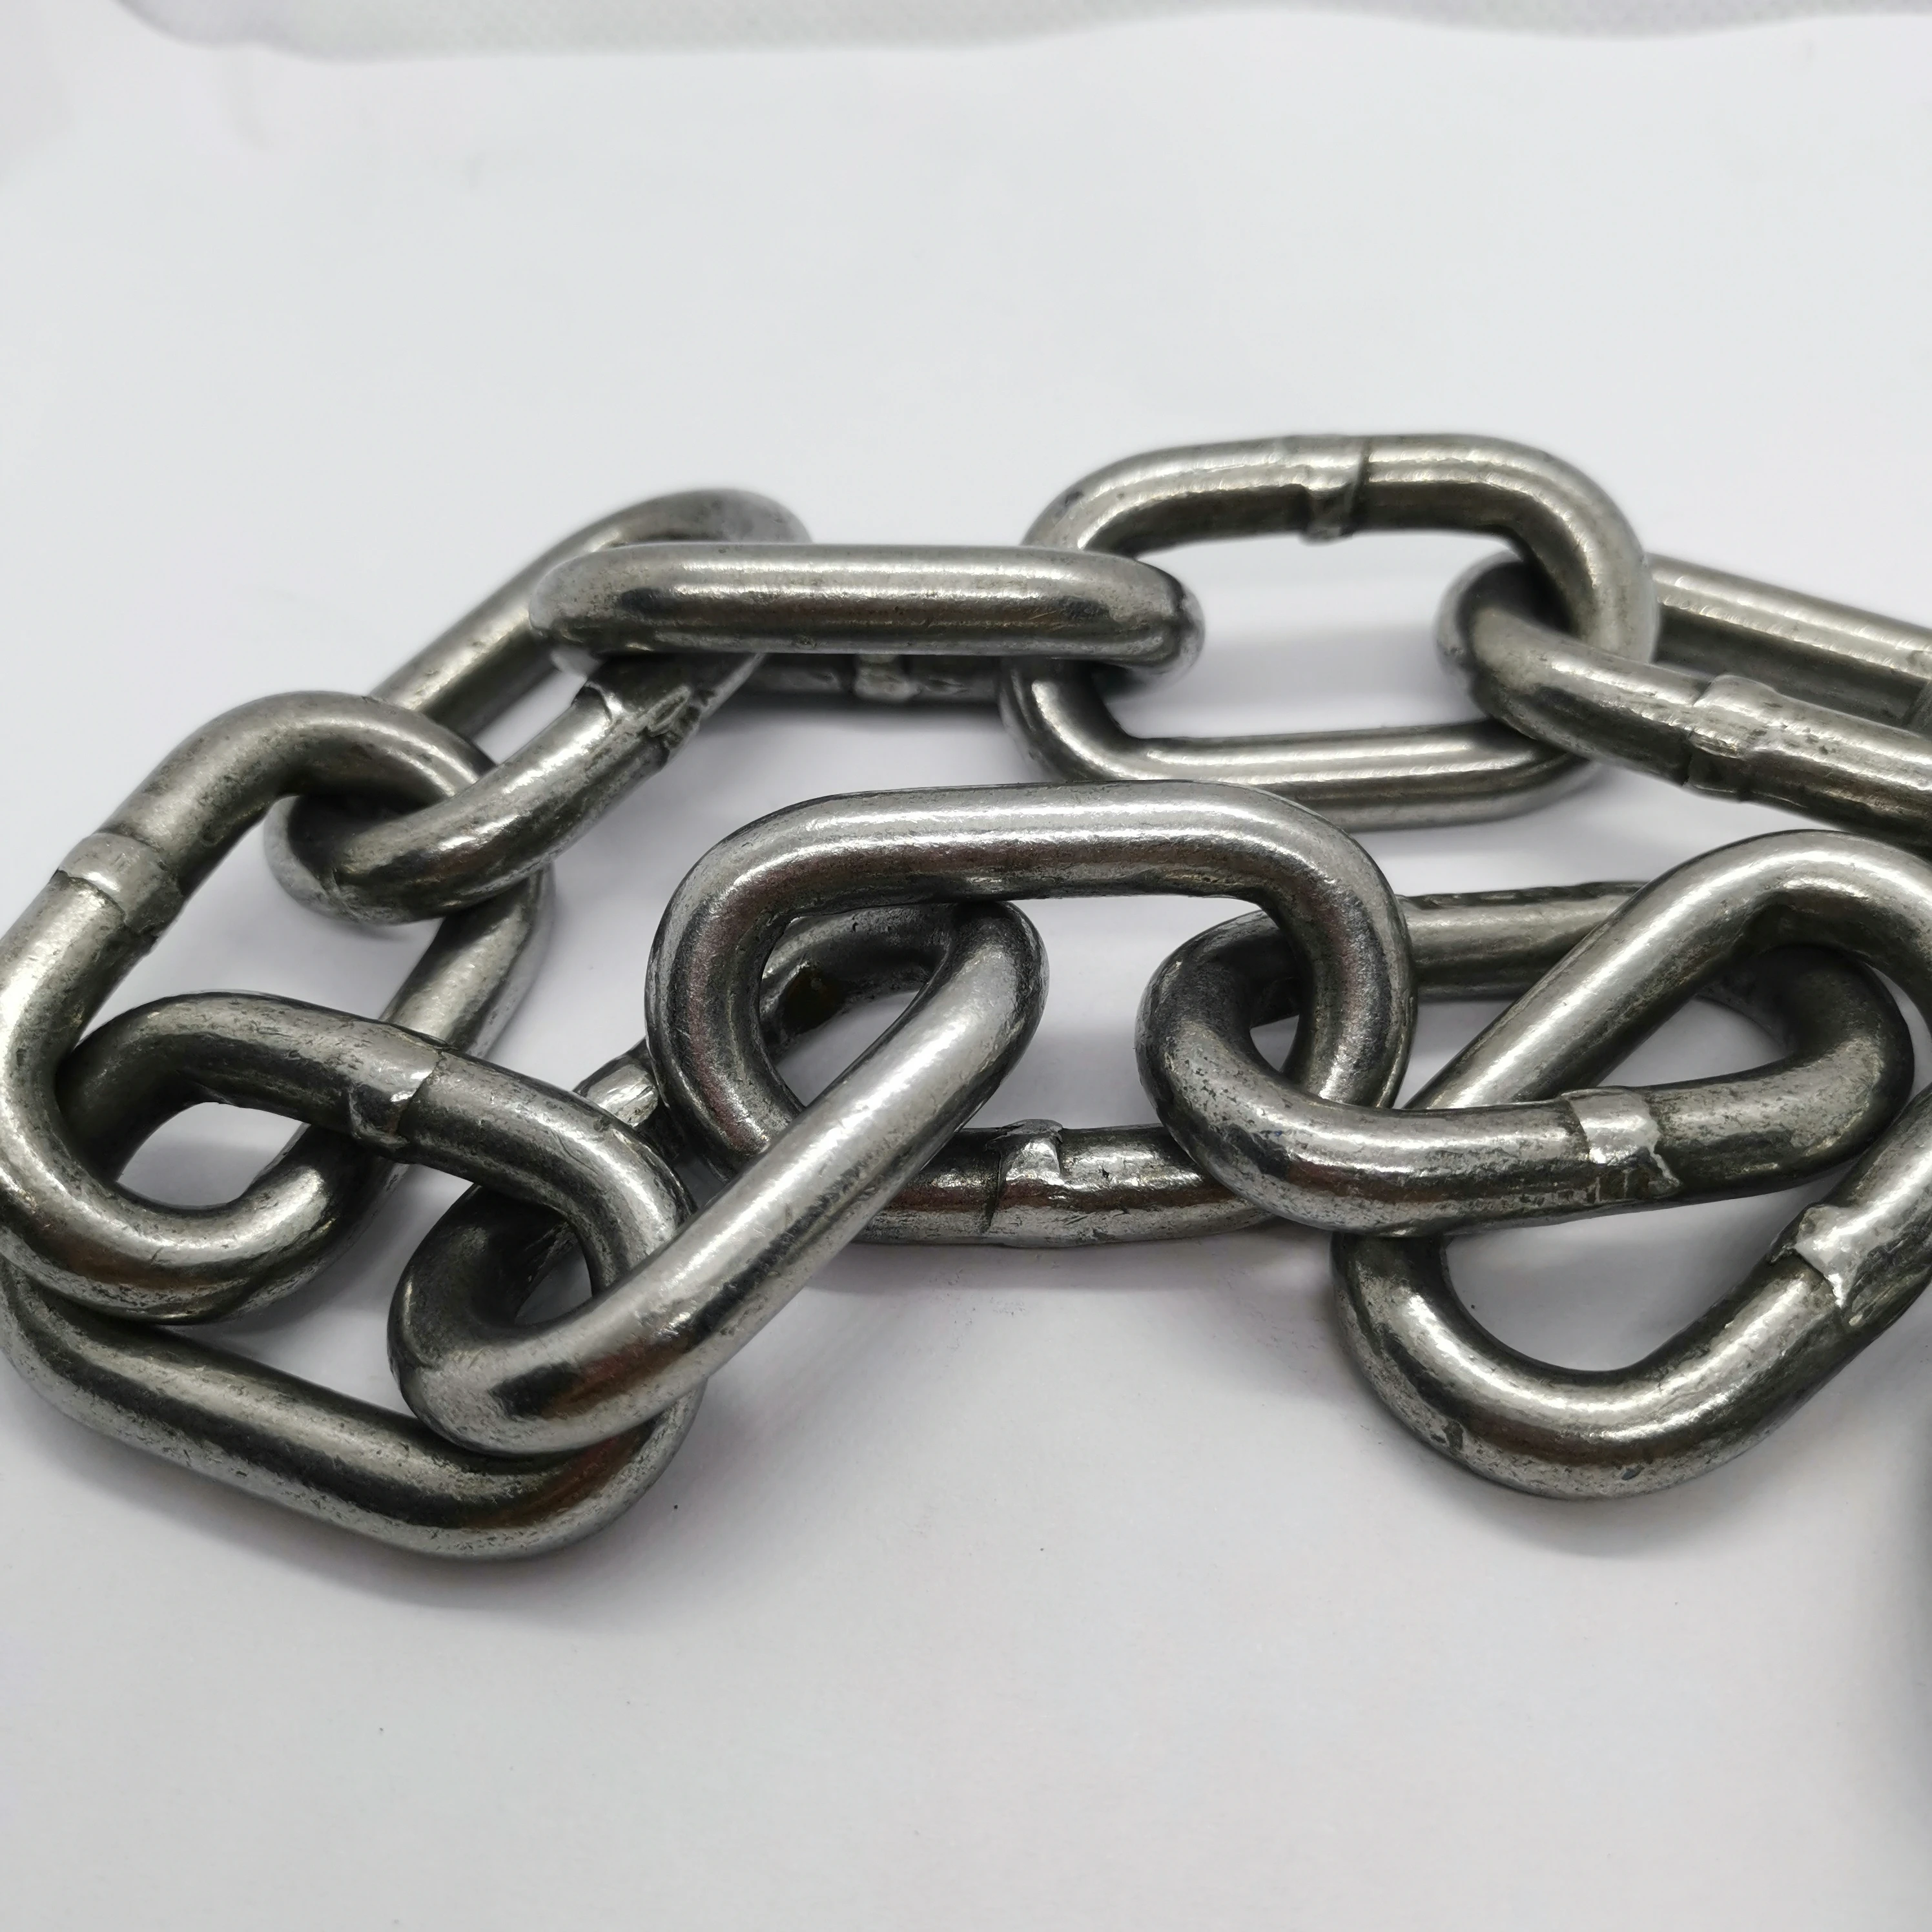 USA Standard Welded Link Chain, Blacken Finished 7mm Link Chain